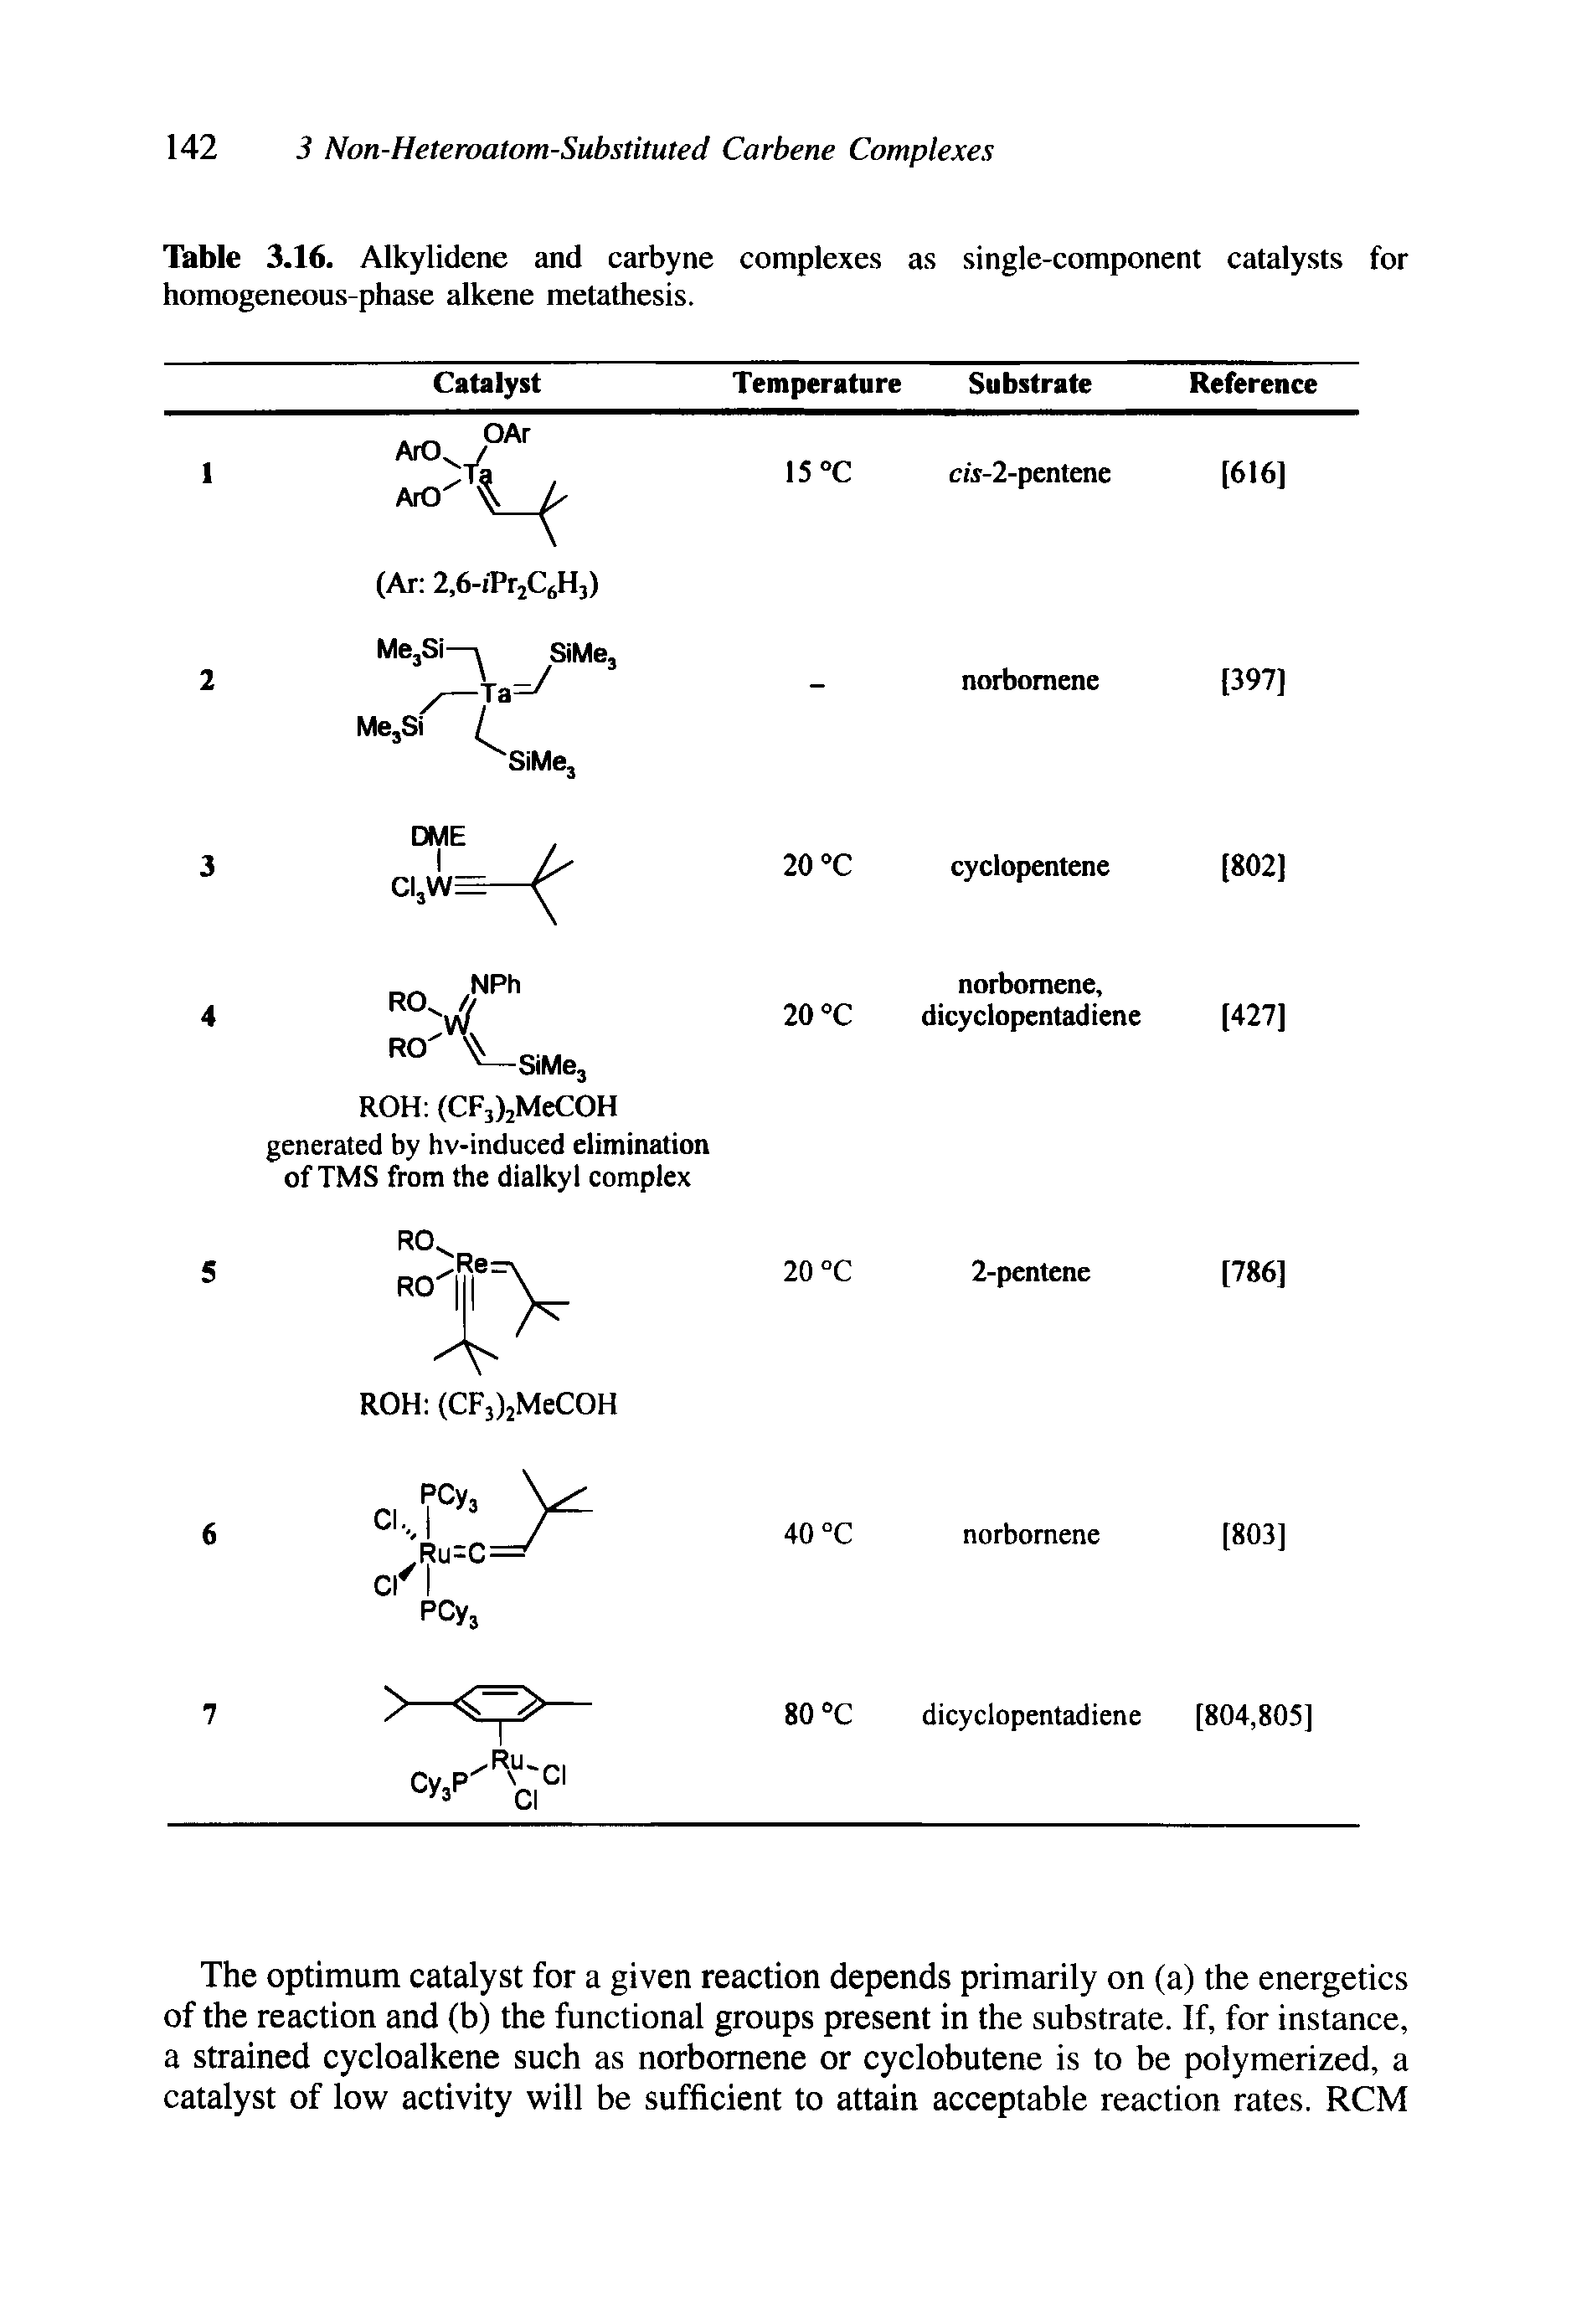 Table 3.16. Alkylidene and carbyne complexes as single-component catalysts for homogeneous-phase alkene metathesis.